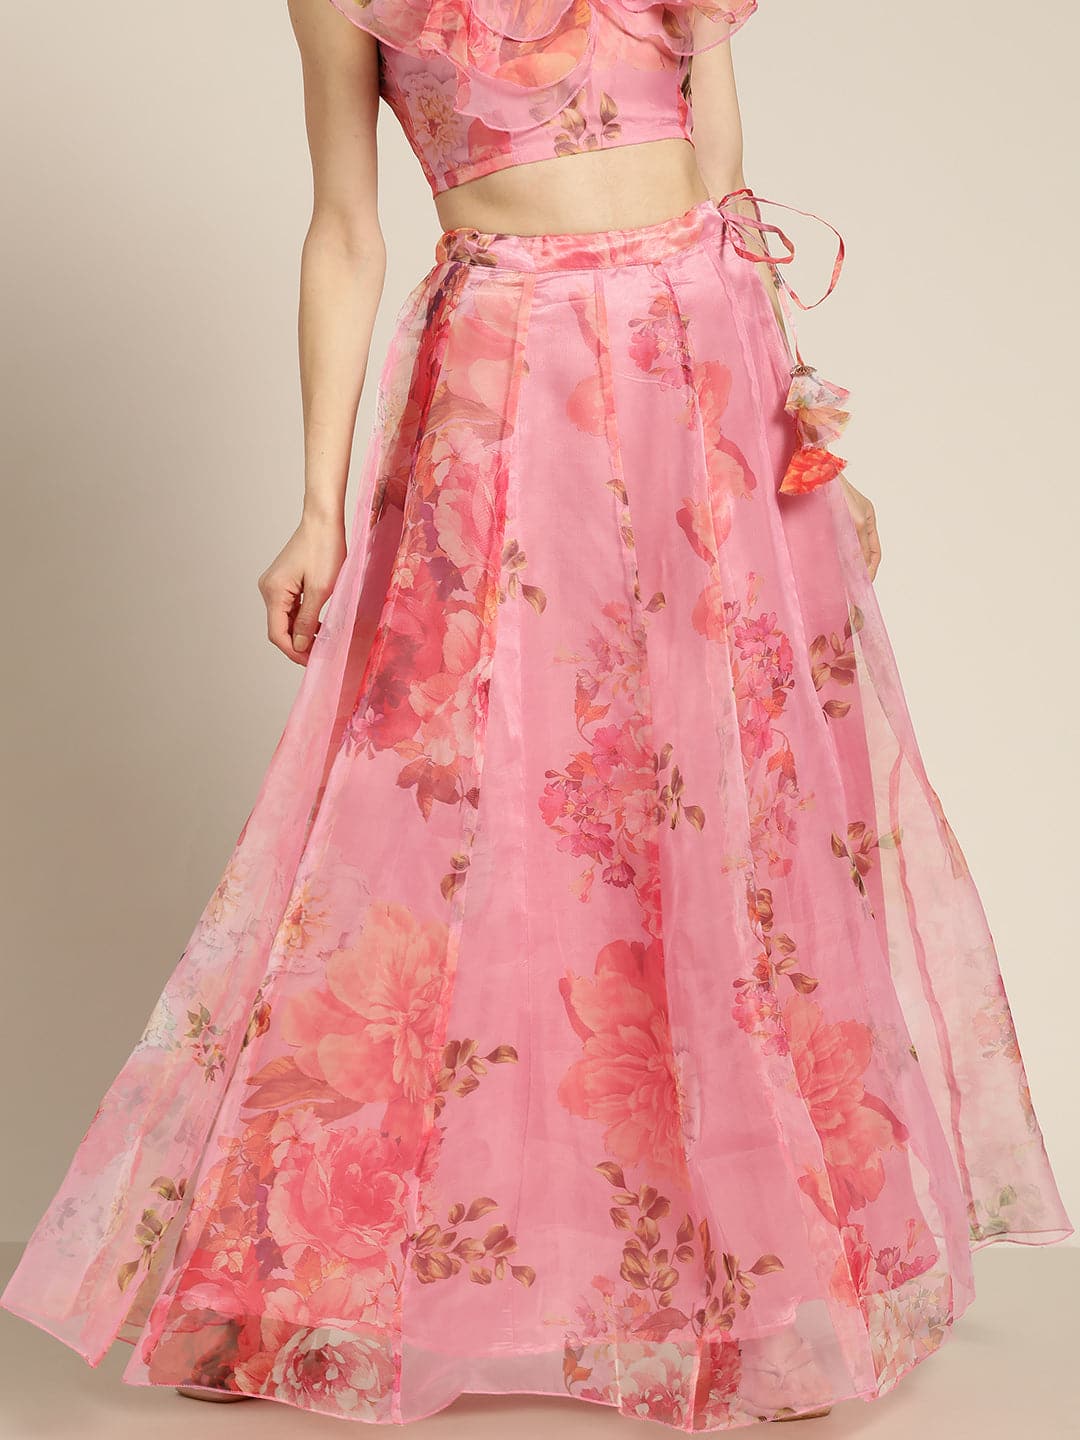 Floral organza lehenga with crop top - set of two by The Anarkali